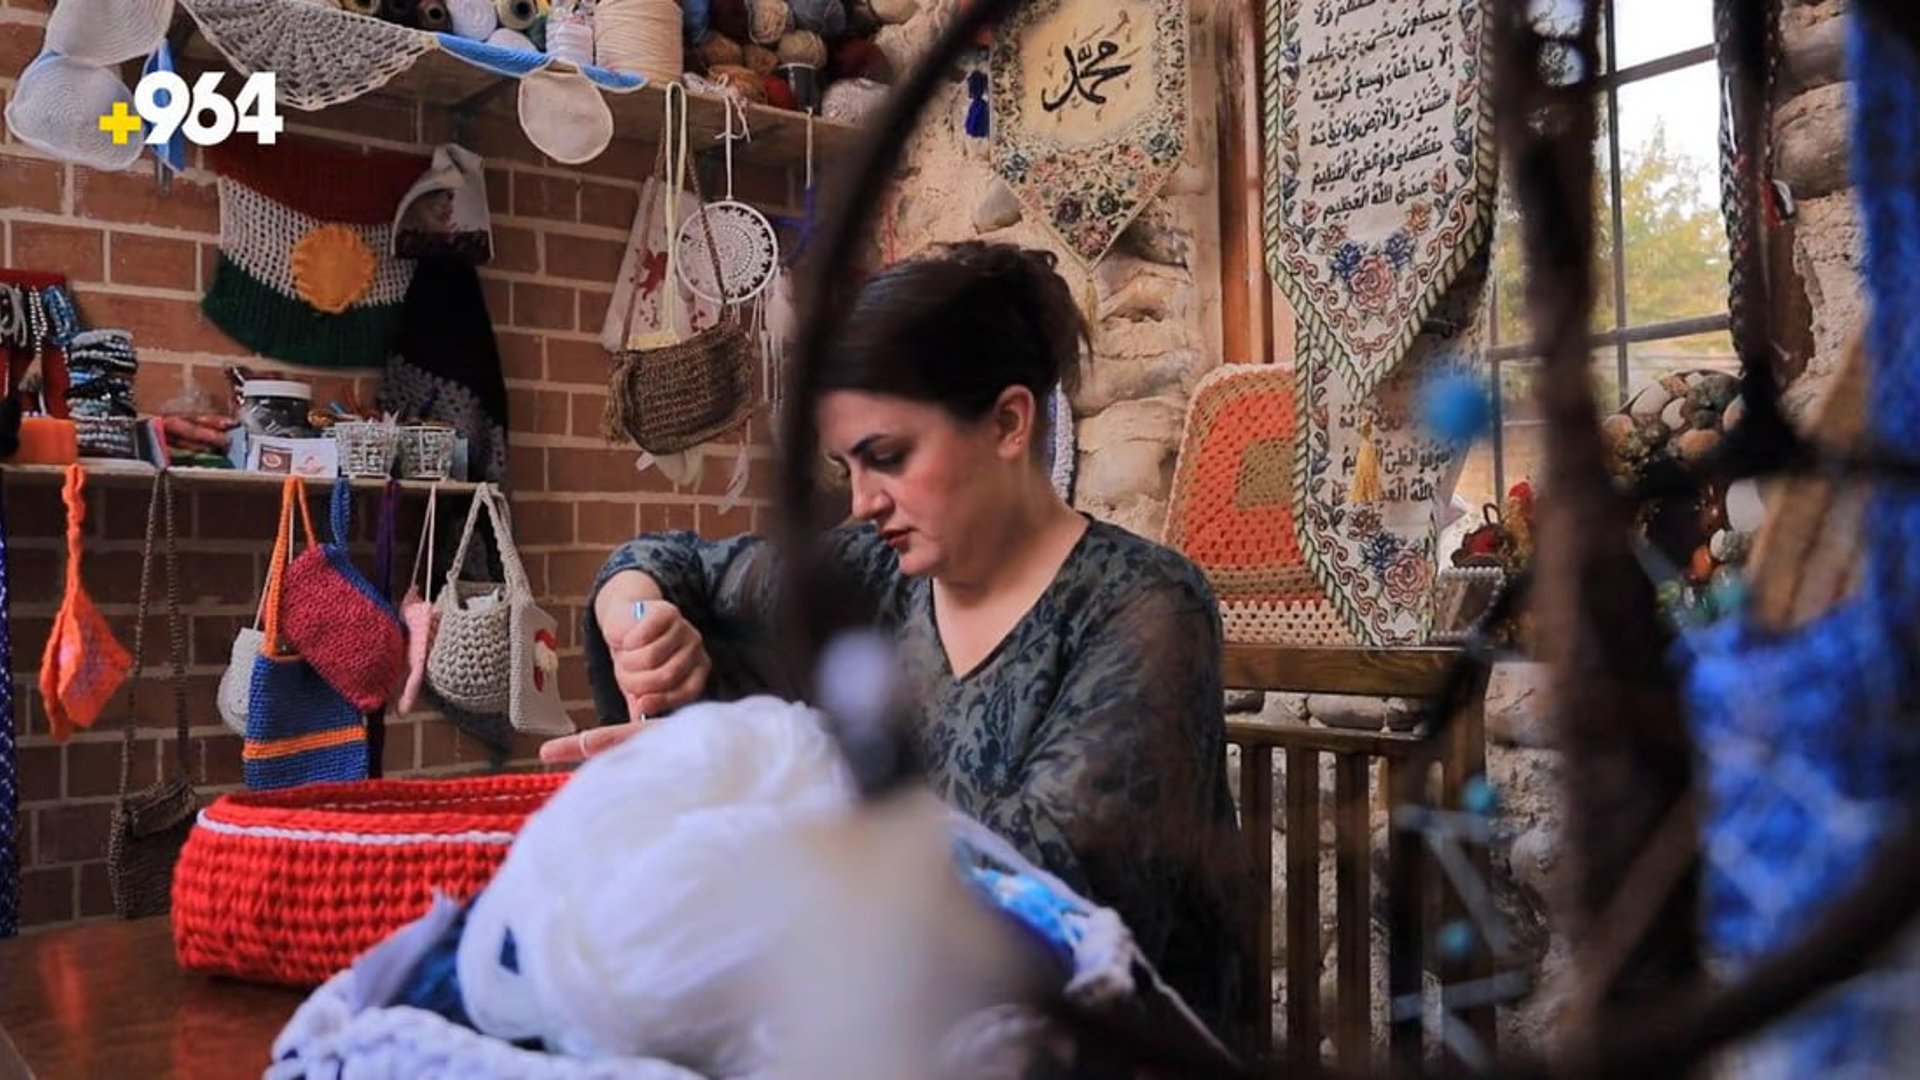 Tourism directorate supports womenowned shops in ancient Zakho market